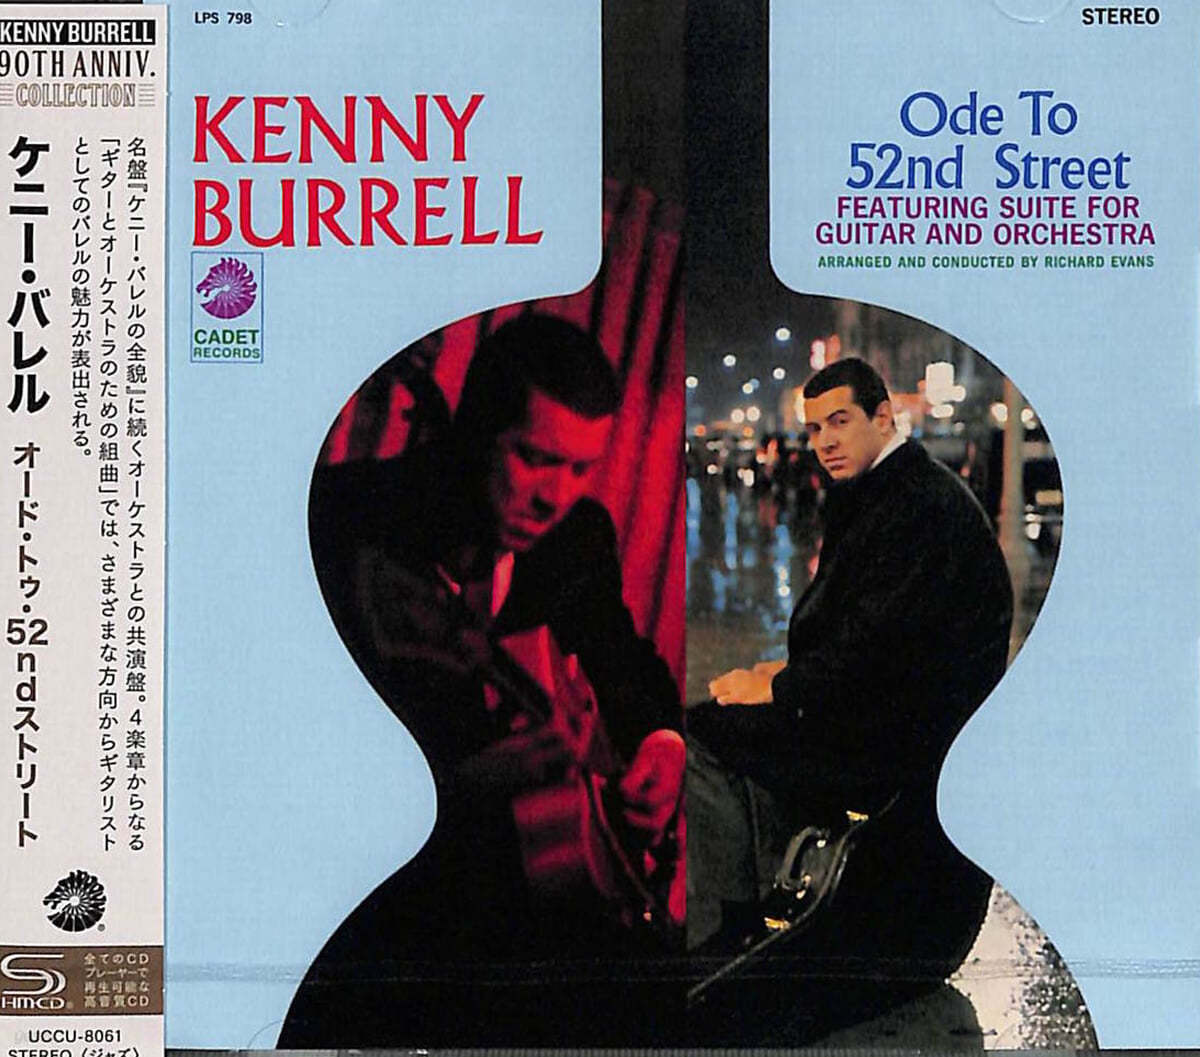 Kenny Burrell (케니 버렐) - Ode To 52nd Street